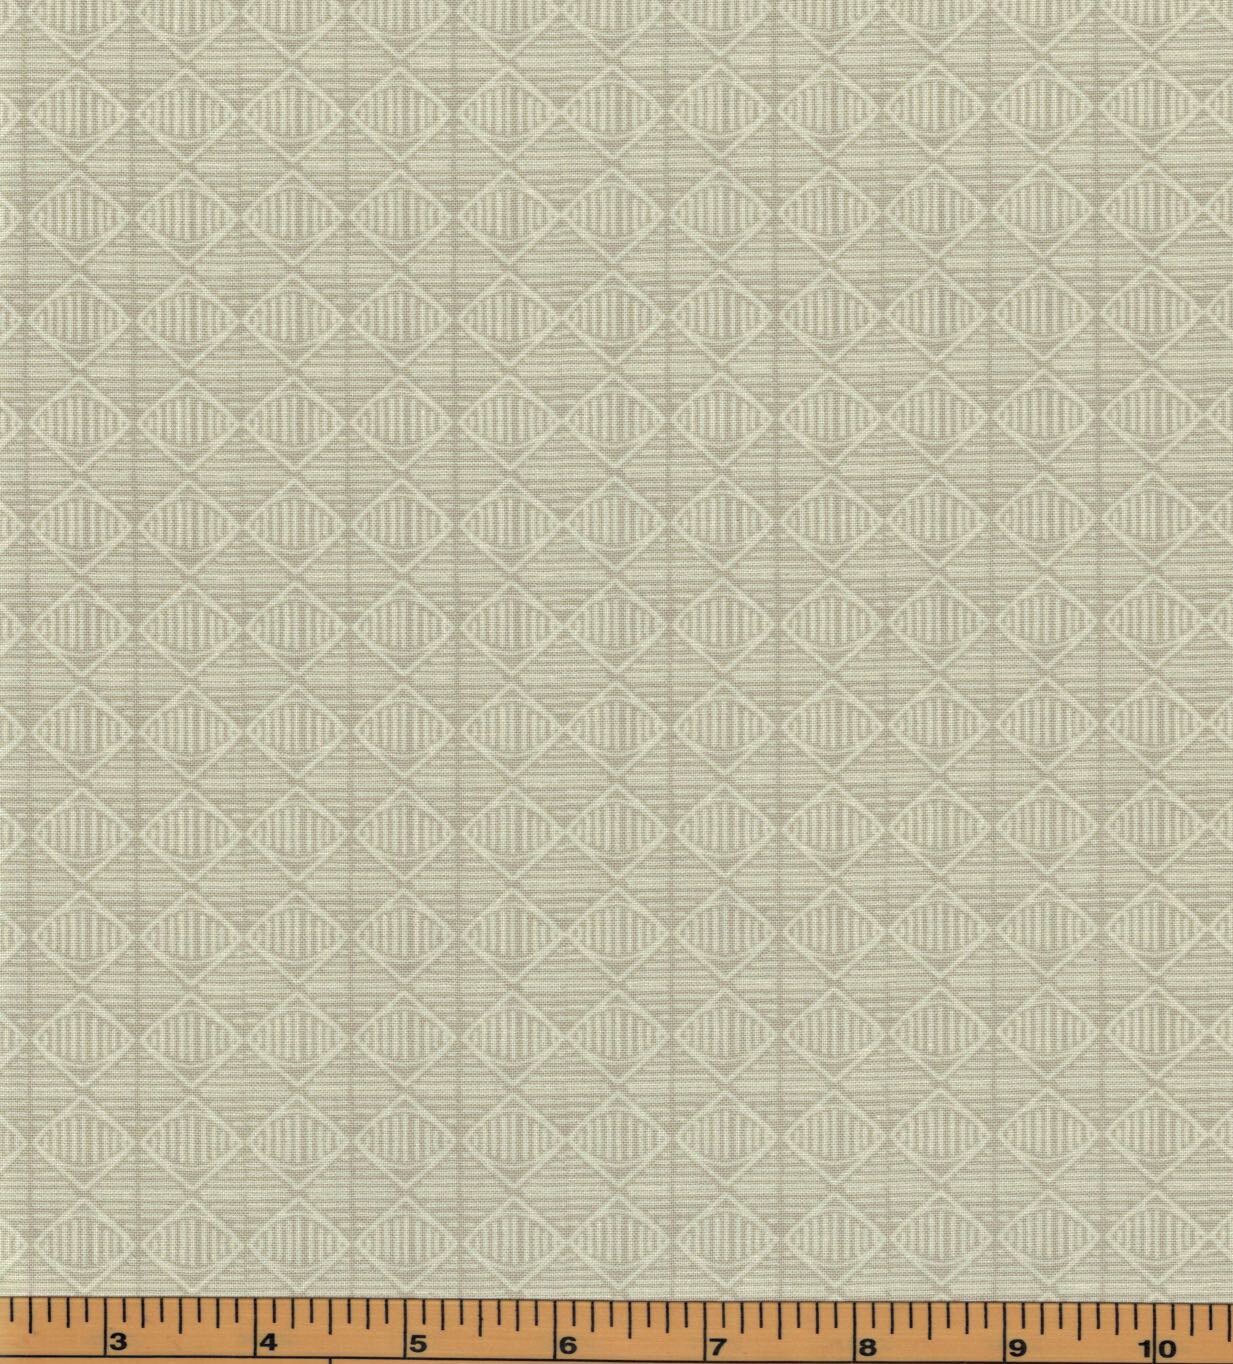 Cream Blender Fabric - Filler Wisdom Of The Plains Collection By Quilting Treasures 100% Cotton